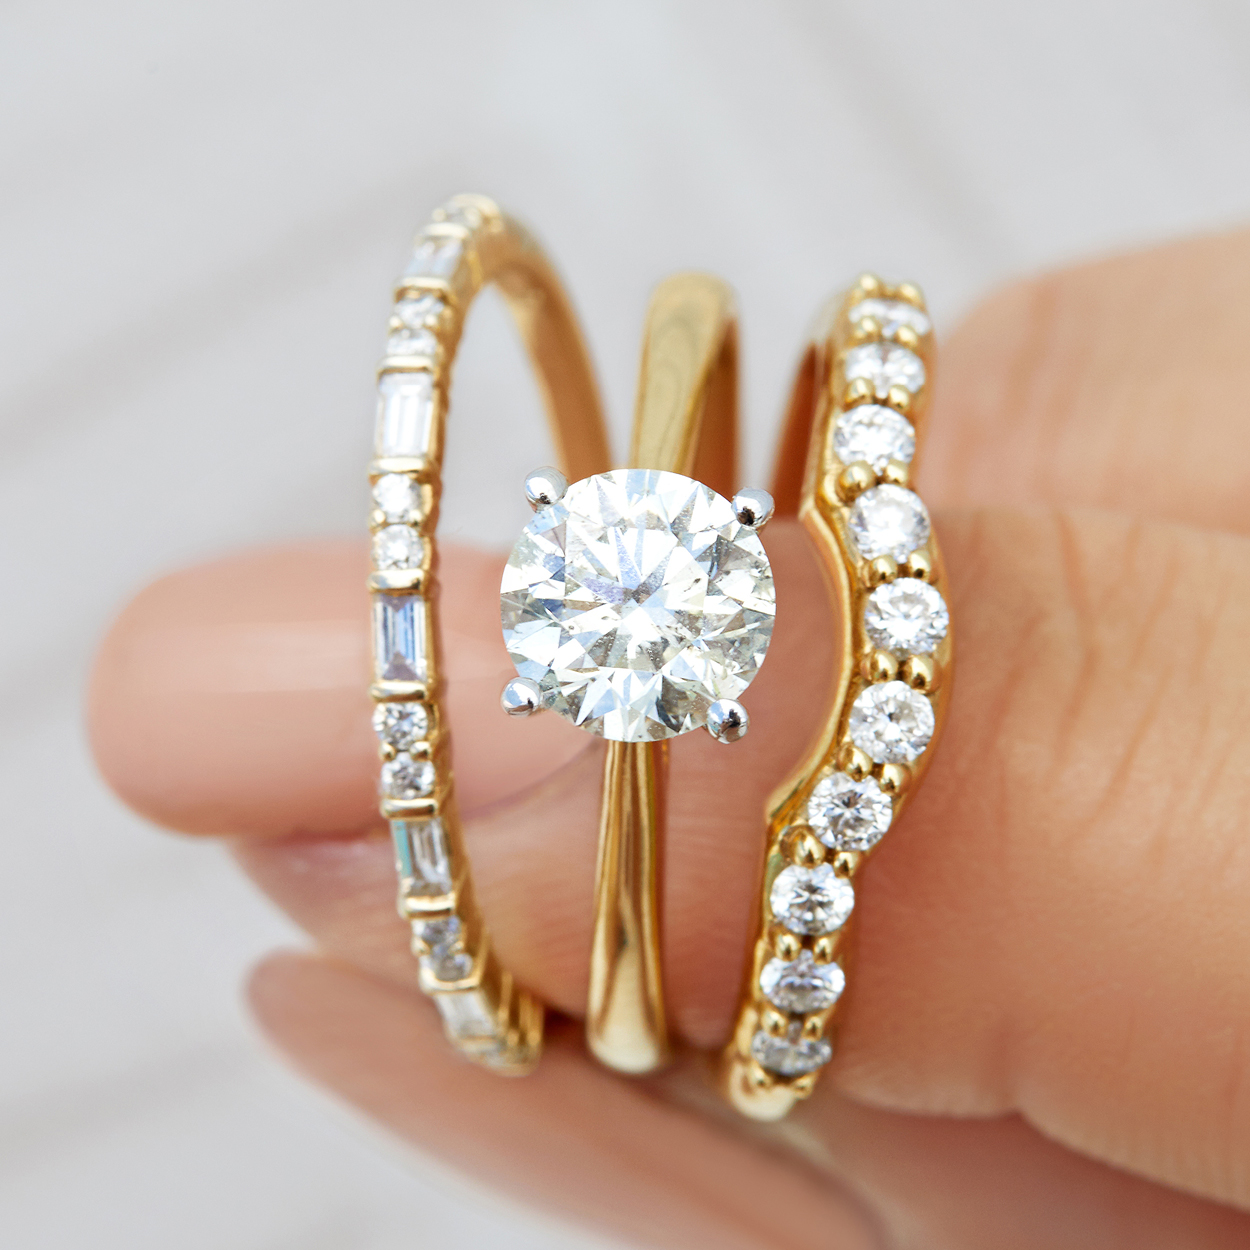 Engagement Ring And It's Types | Styled